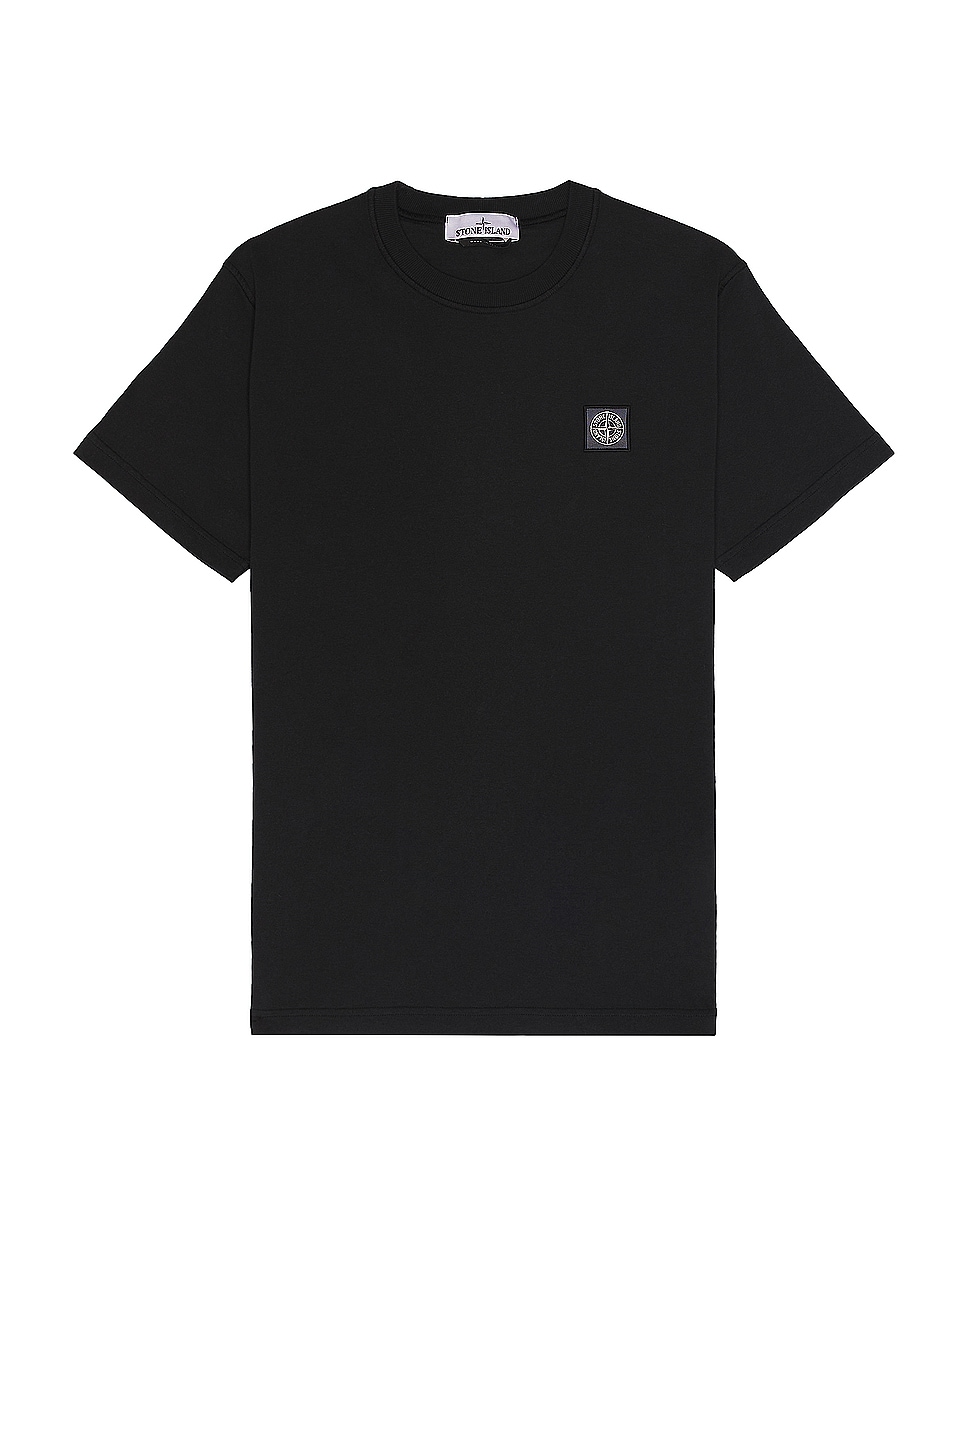 Image 1 of Stone Island T-shirt in Black